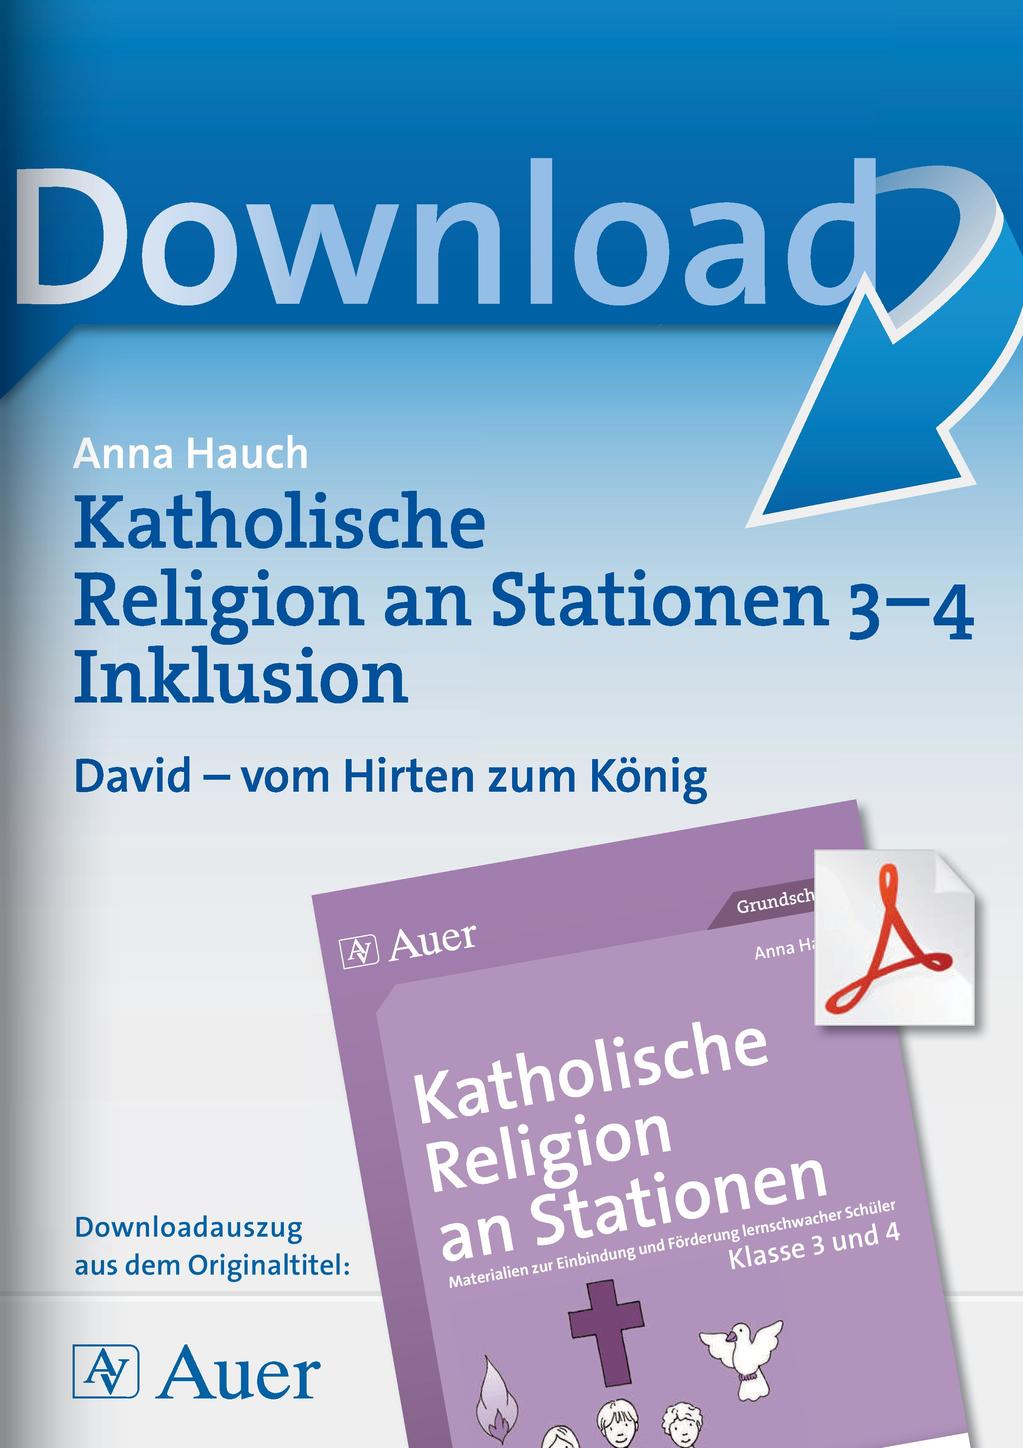 Kath. Religion an Stationen: David Preview 1